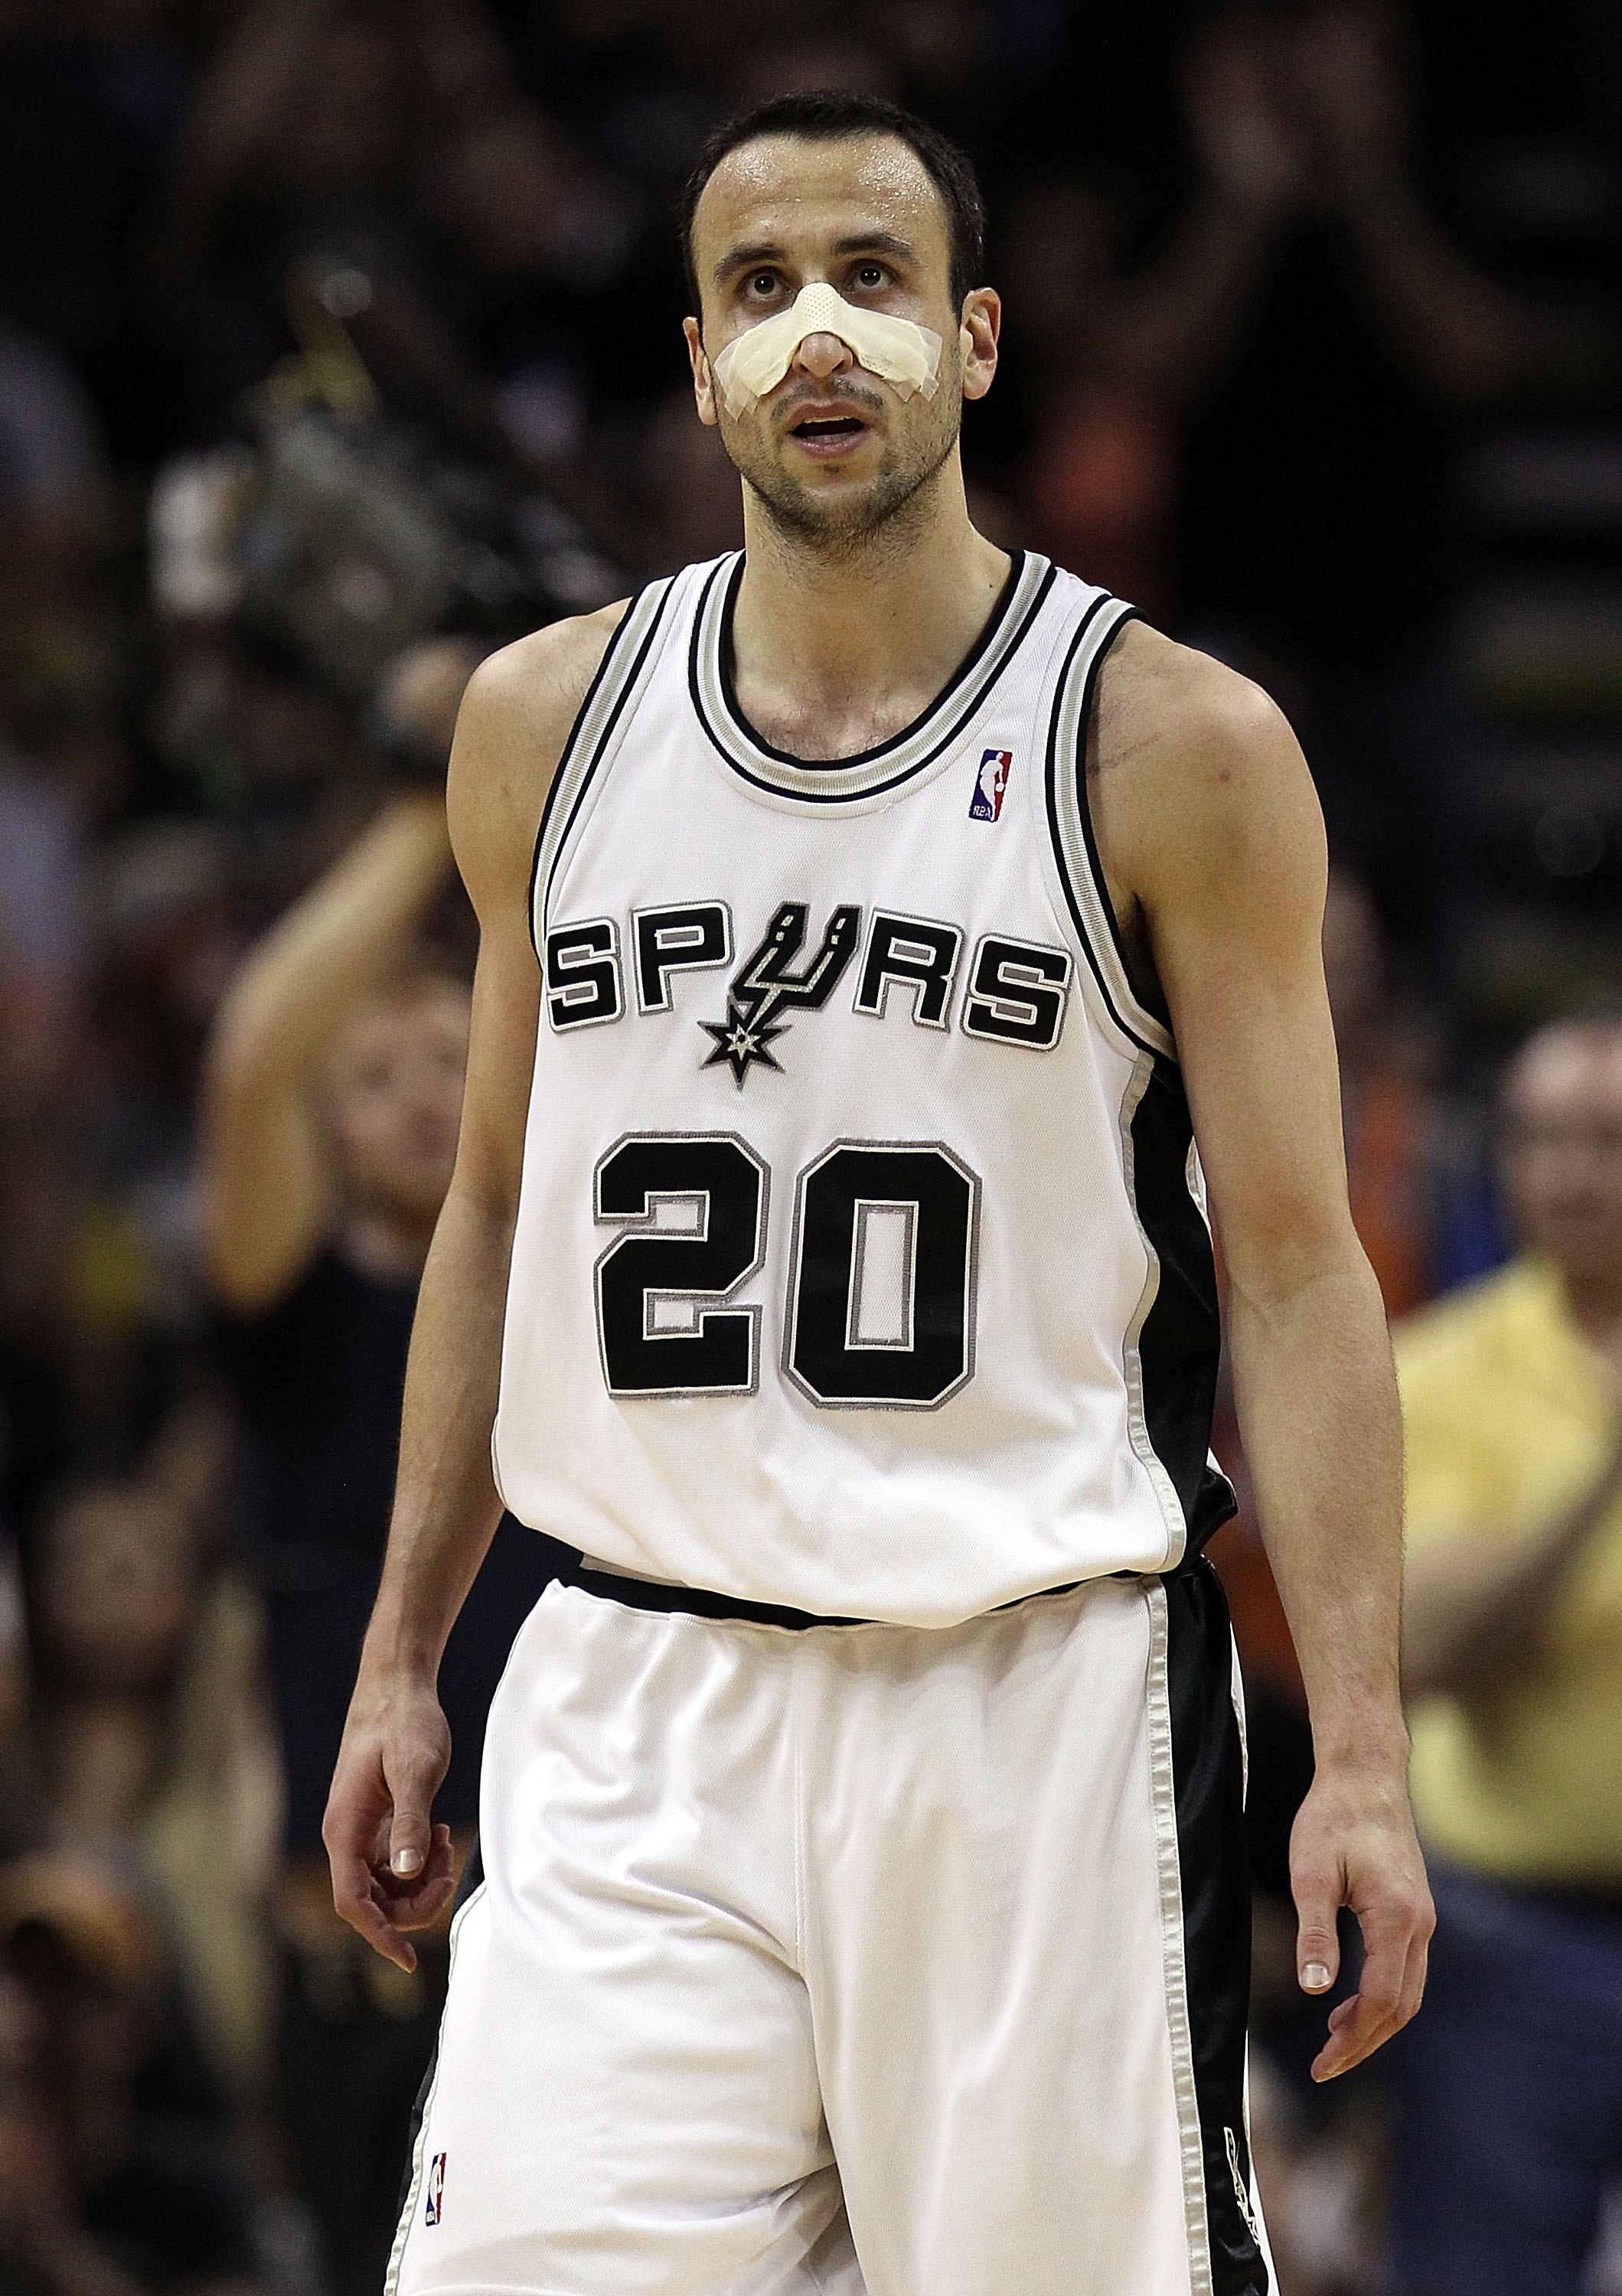 SAN ANTONIO - MAY 09:  Guard Manu Ginobili #20 of the San Antonio Spurs in Game Four of the Western Conference Semifinals during the 2010 NBA Playoffs at AT&T Center on May 9, 2010 in San Antonio, Texas. NOTE TO USER: User expressly acknowledges and agree